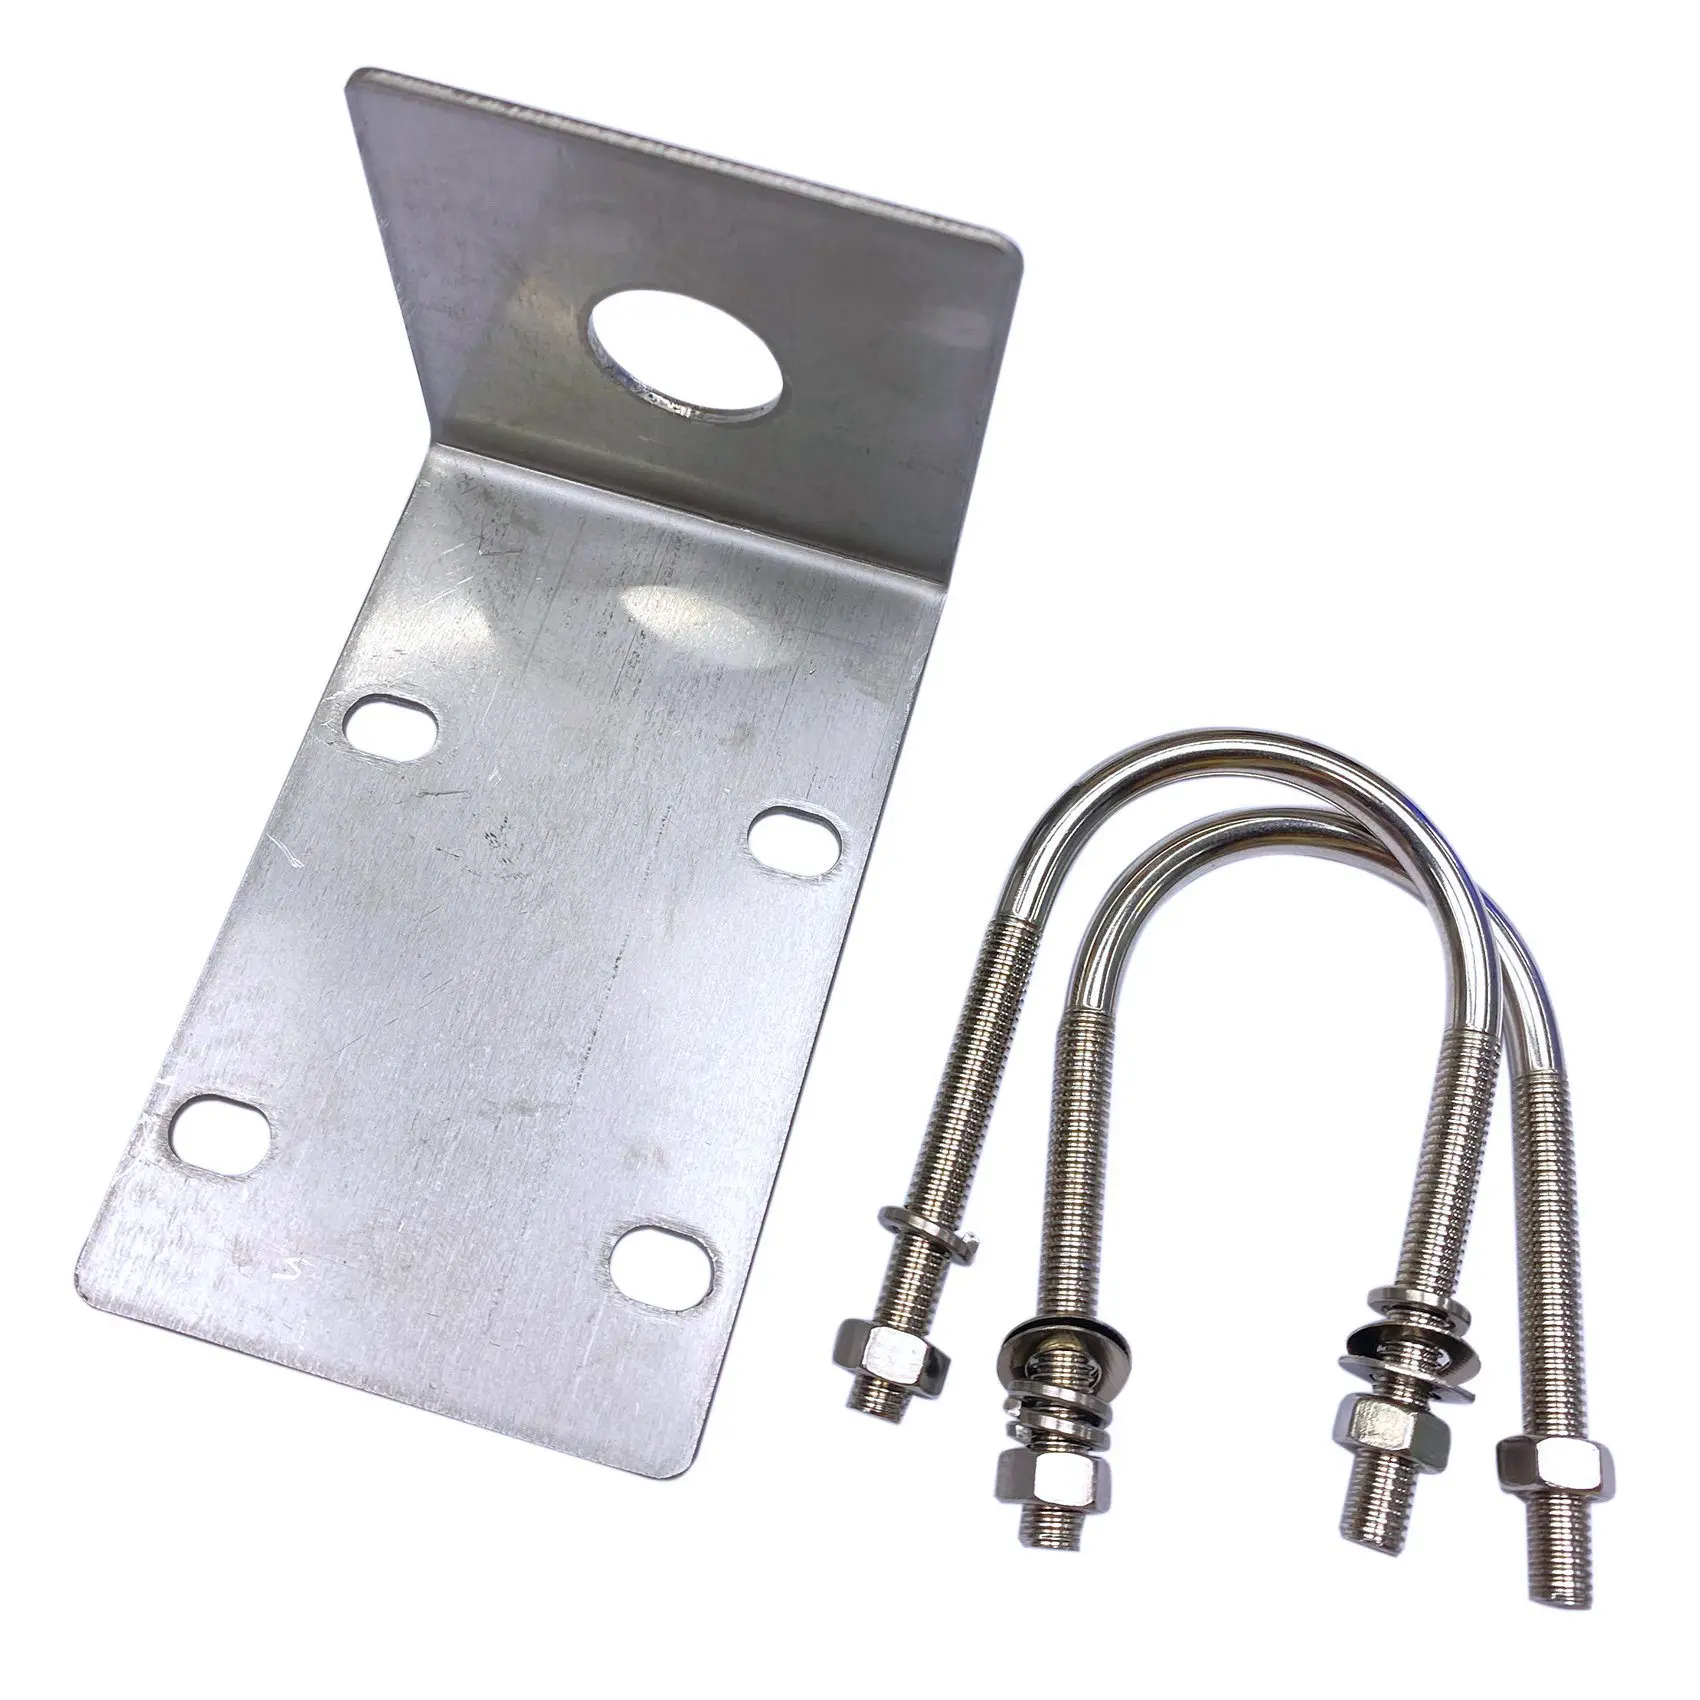 

Stainless Steel Antenna Mount Bracket with U Style Bolts for Ham UHF VHF CB Cellular Trucker Antenna Use Accepted